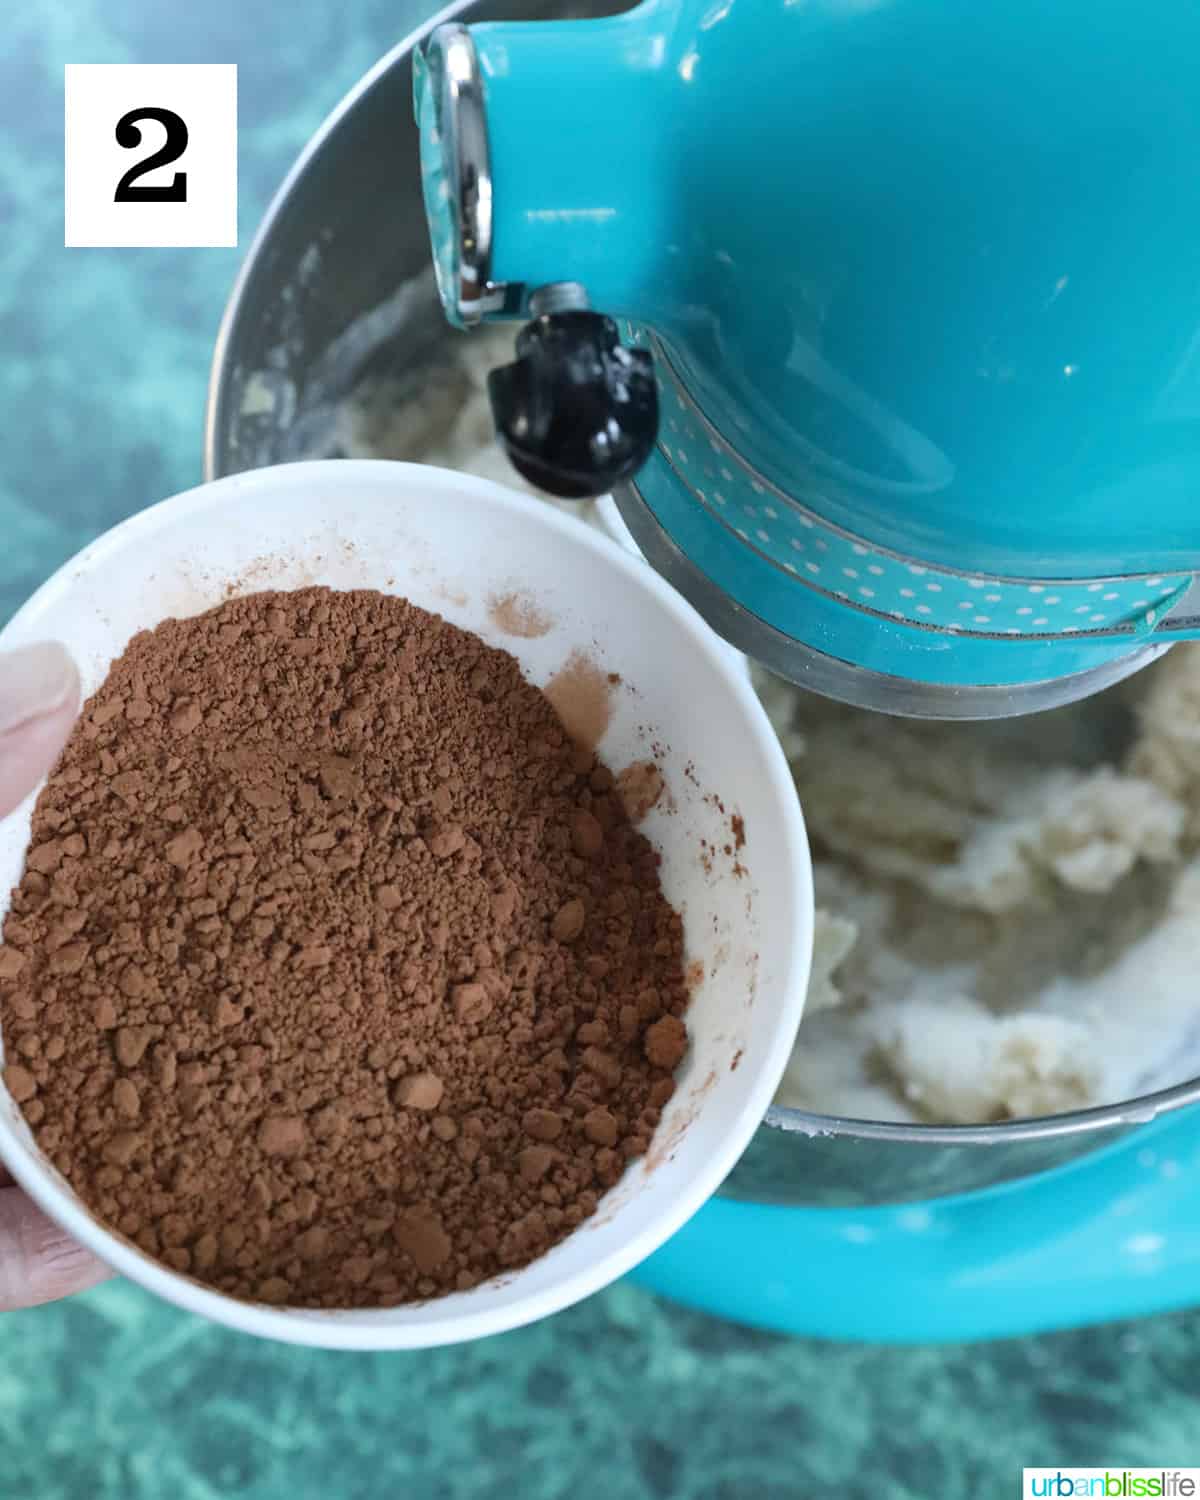 bowl of cocoa powder being added to a blue stand mixer to make chocolate buttercream frosting.